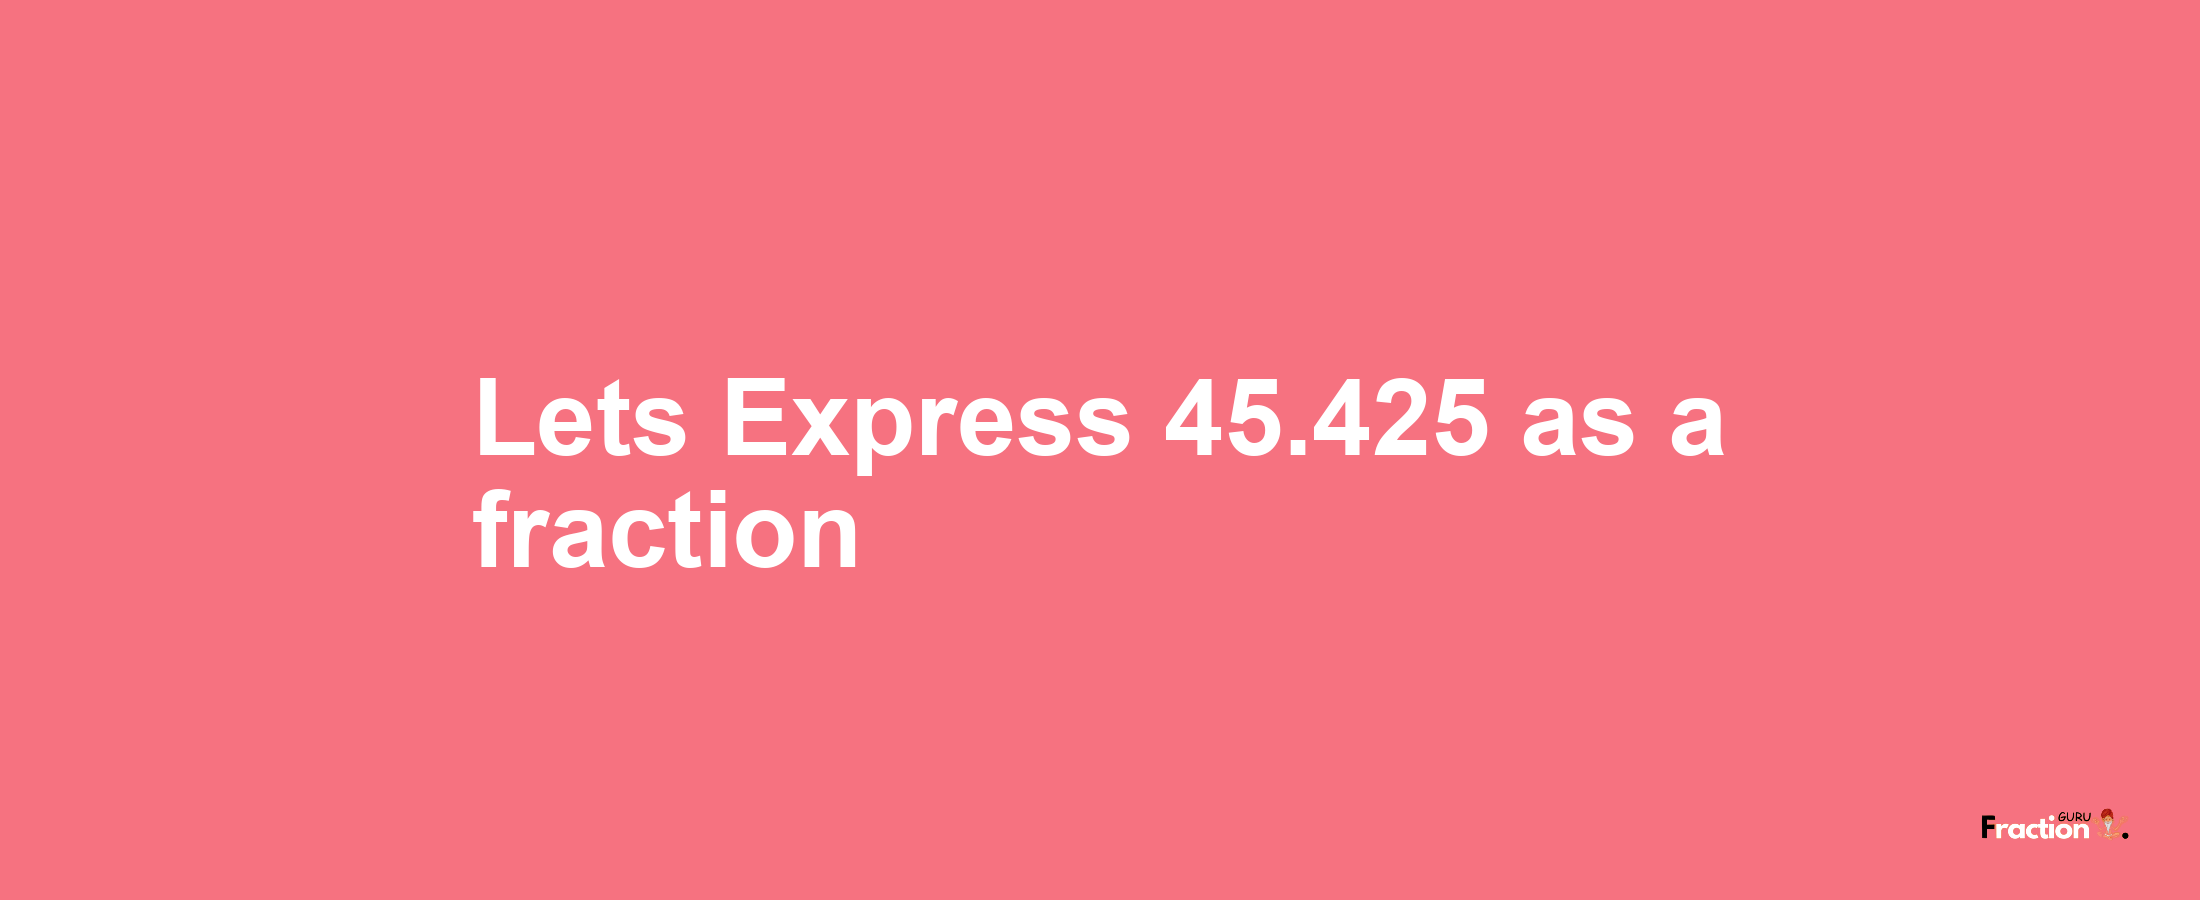 Lets Express 45.425 as afraction